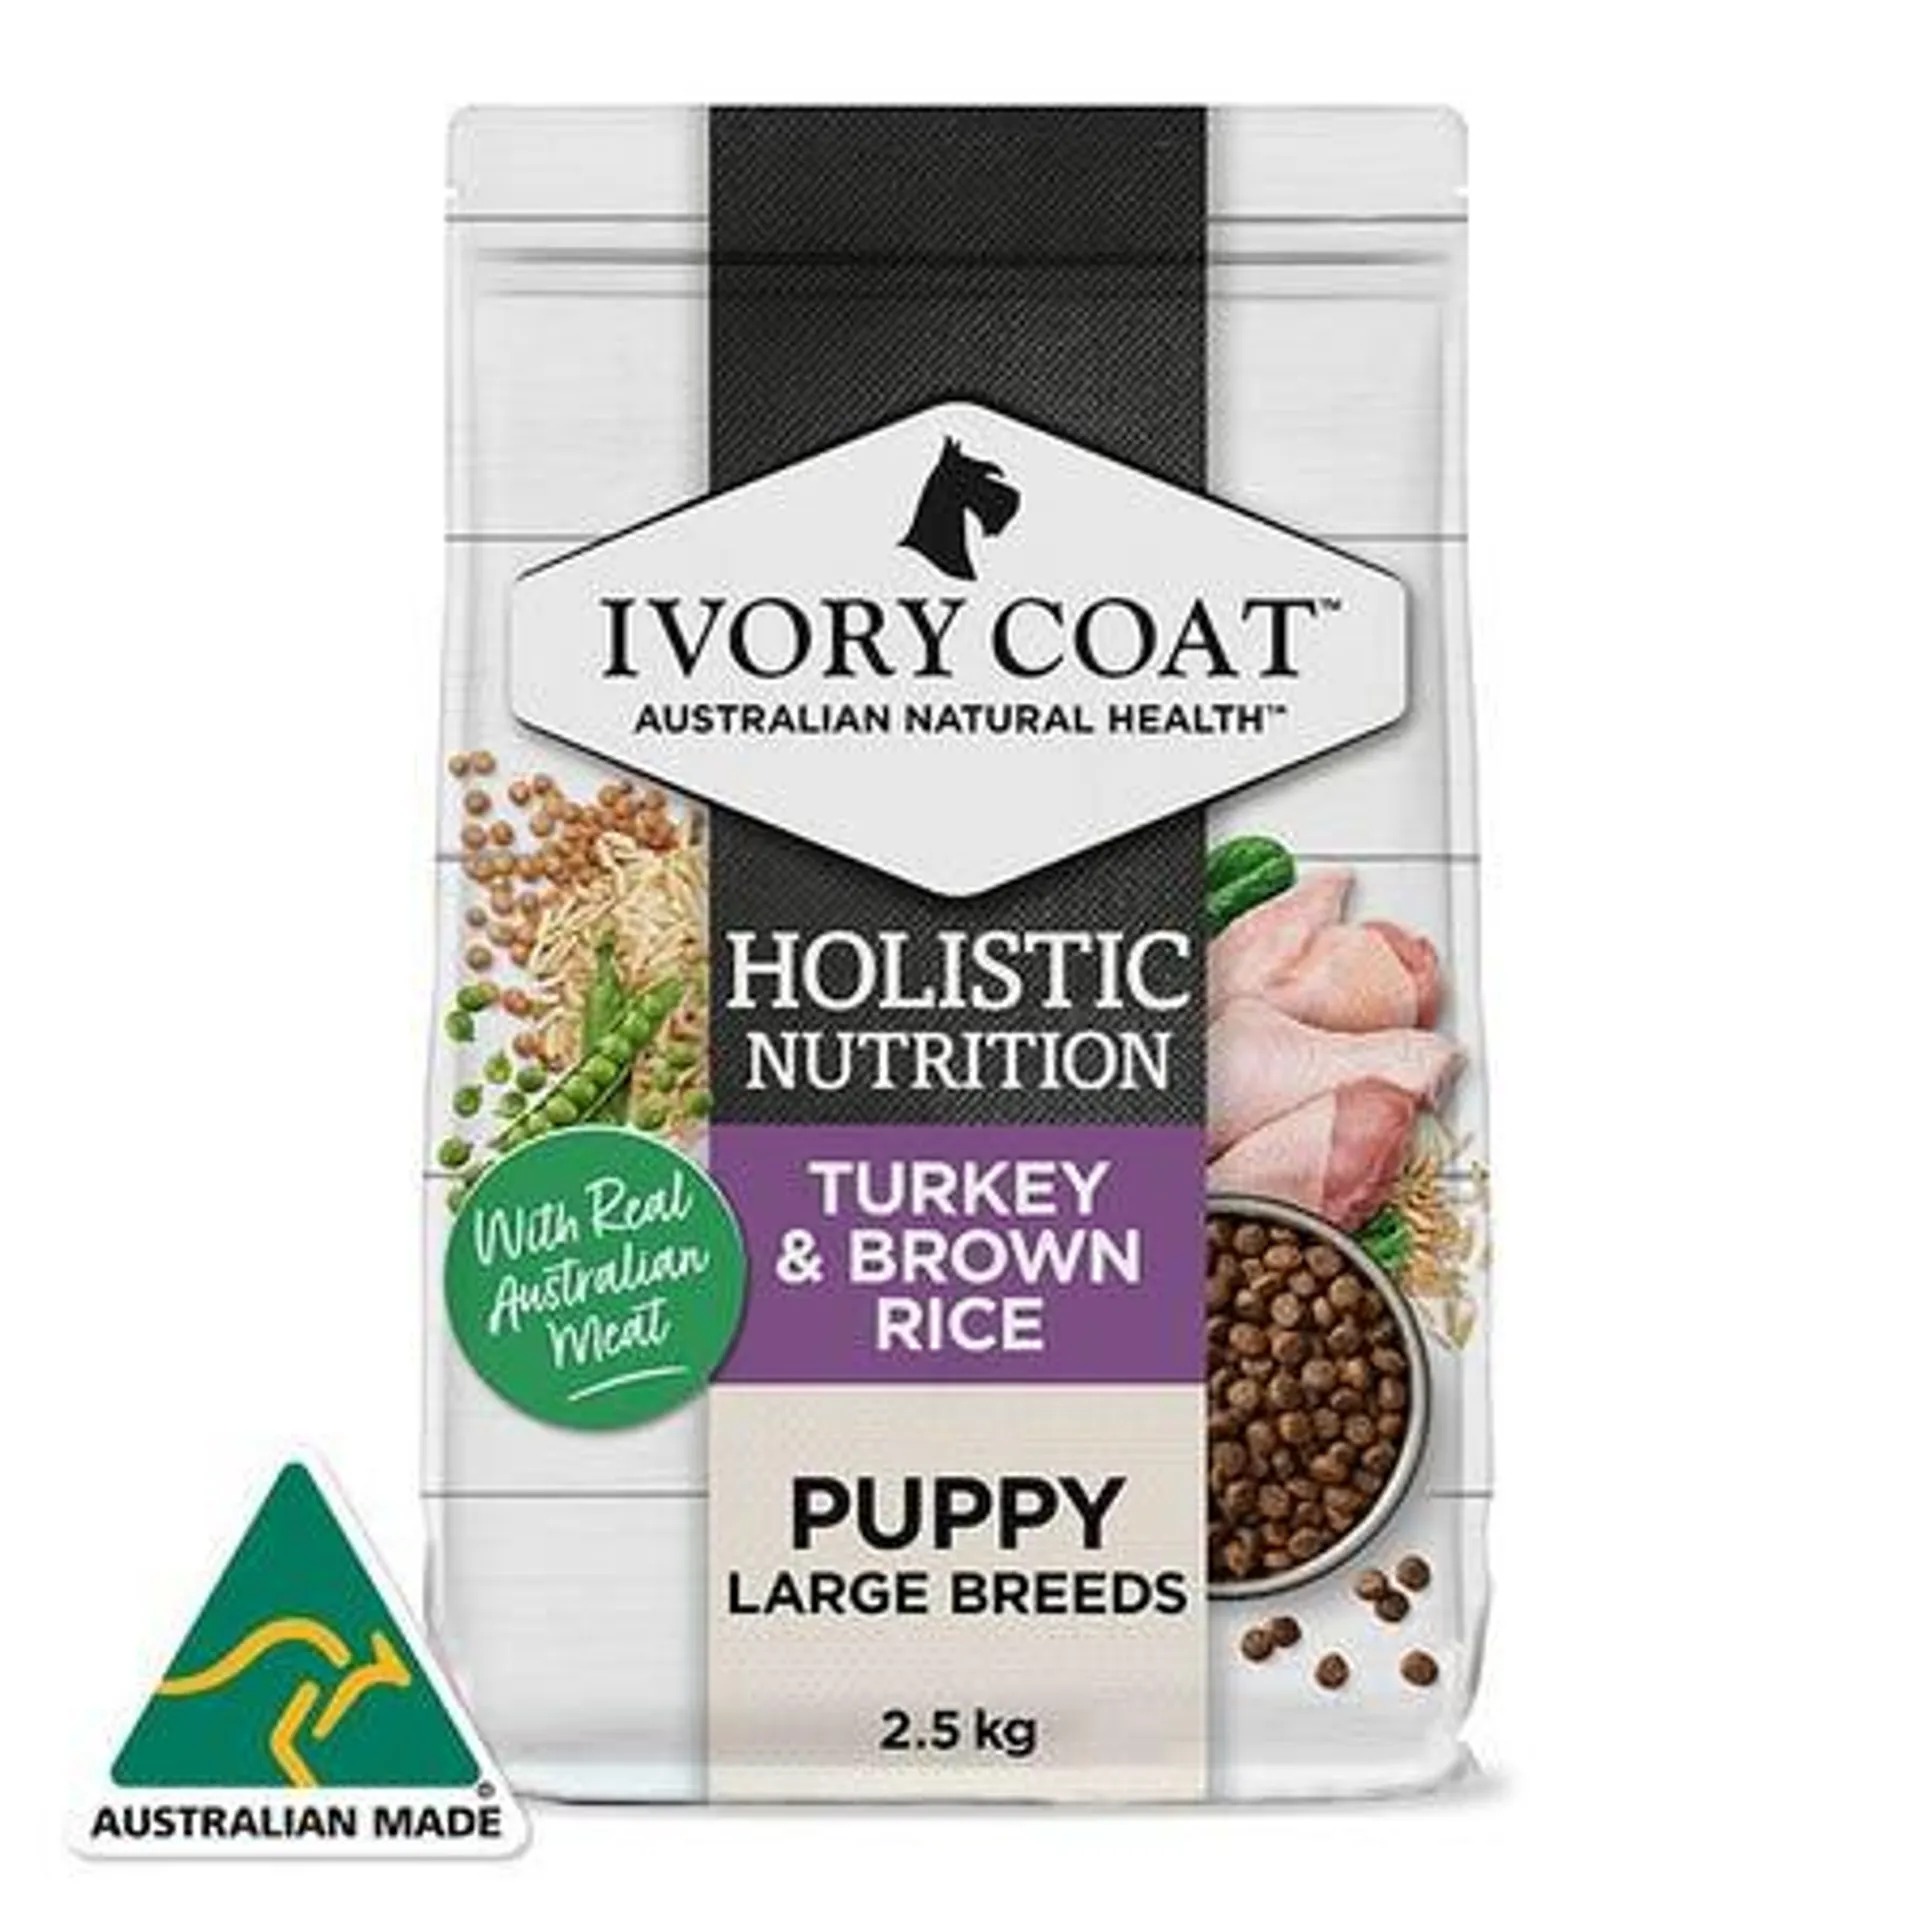 Ivory Coat Large Breed Turkey & Brown Rice Puppy Food